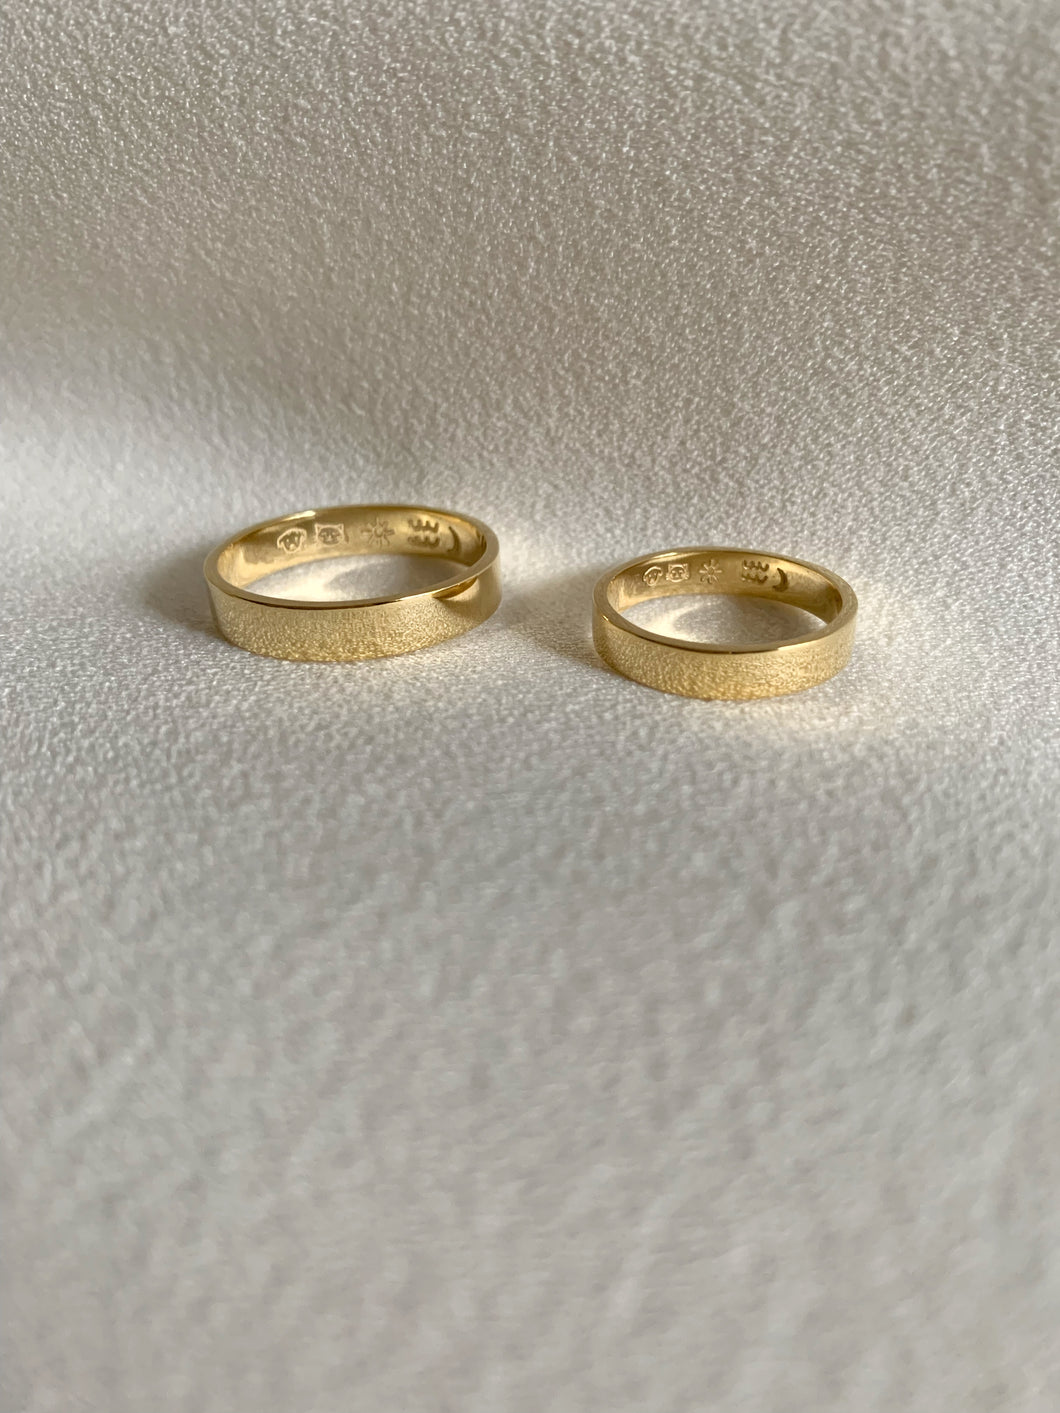 A simple wedding band of 18K yellow gold. The classic style.